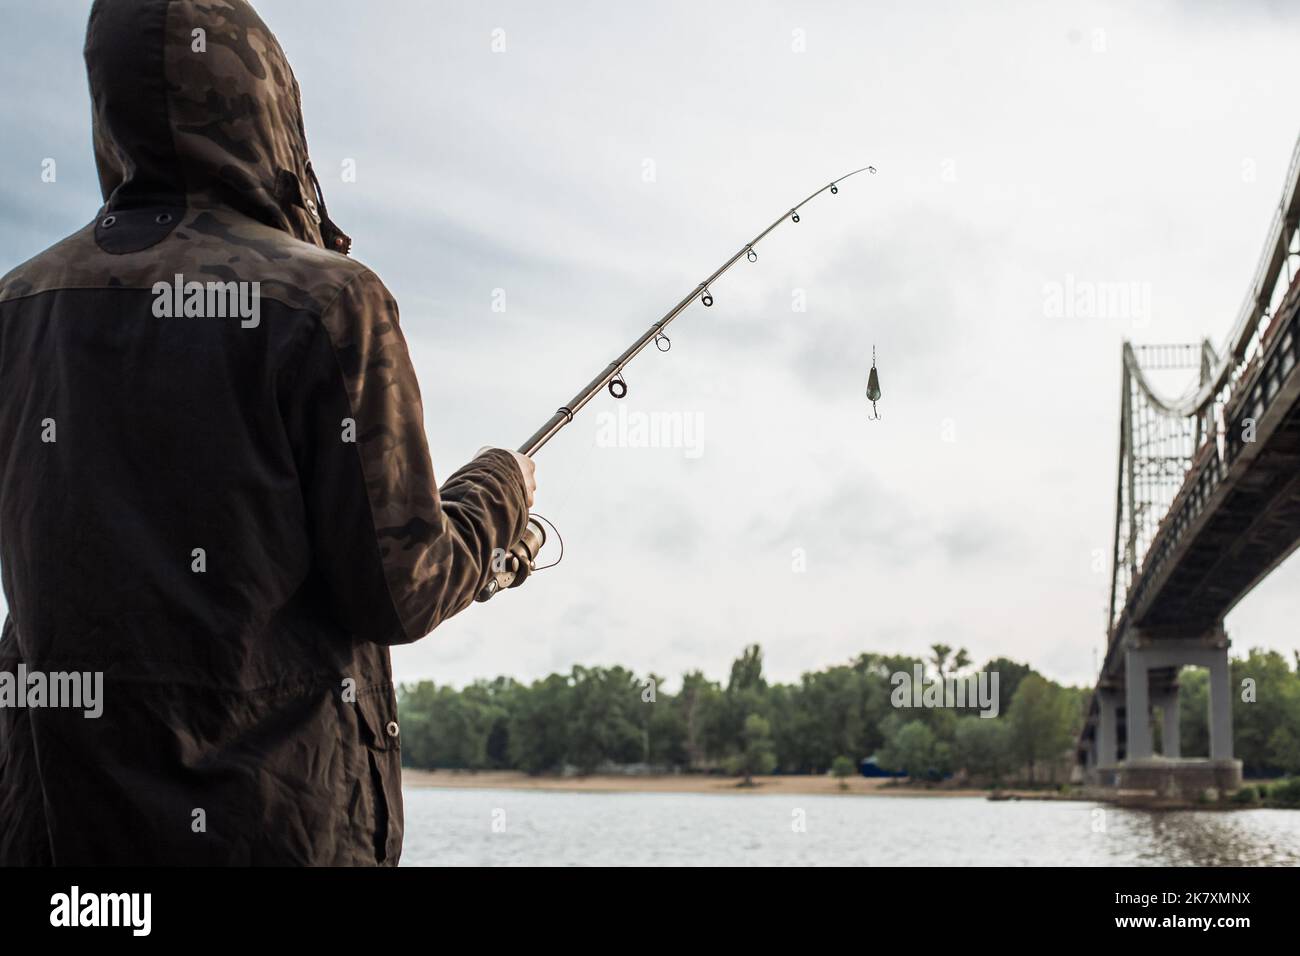 Young man fishing on the river. Fisherman holding spinning rod with spoon bait Stock Photo